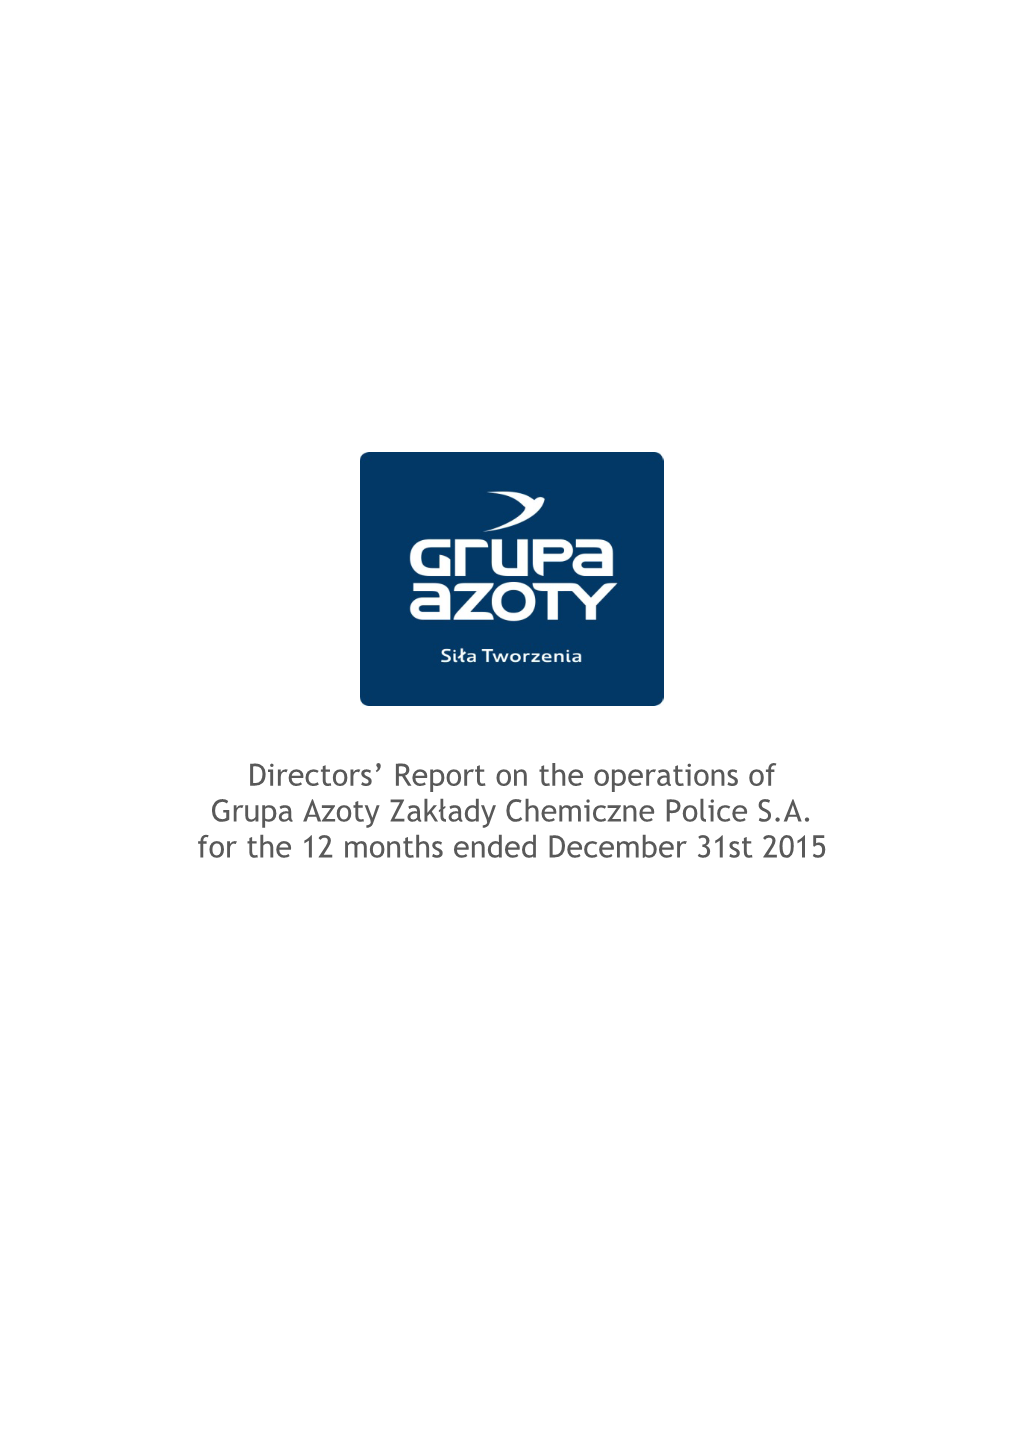 Directors' Report on the Operations of Grupa Azoty